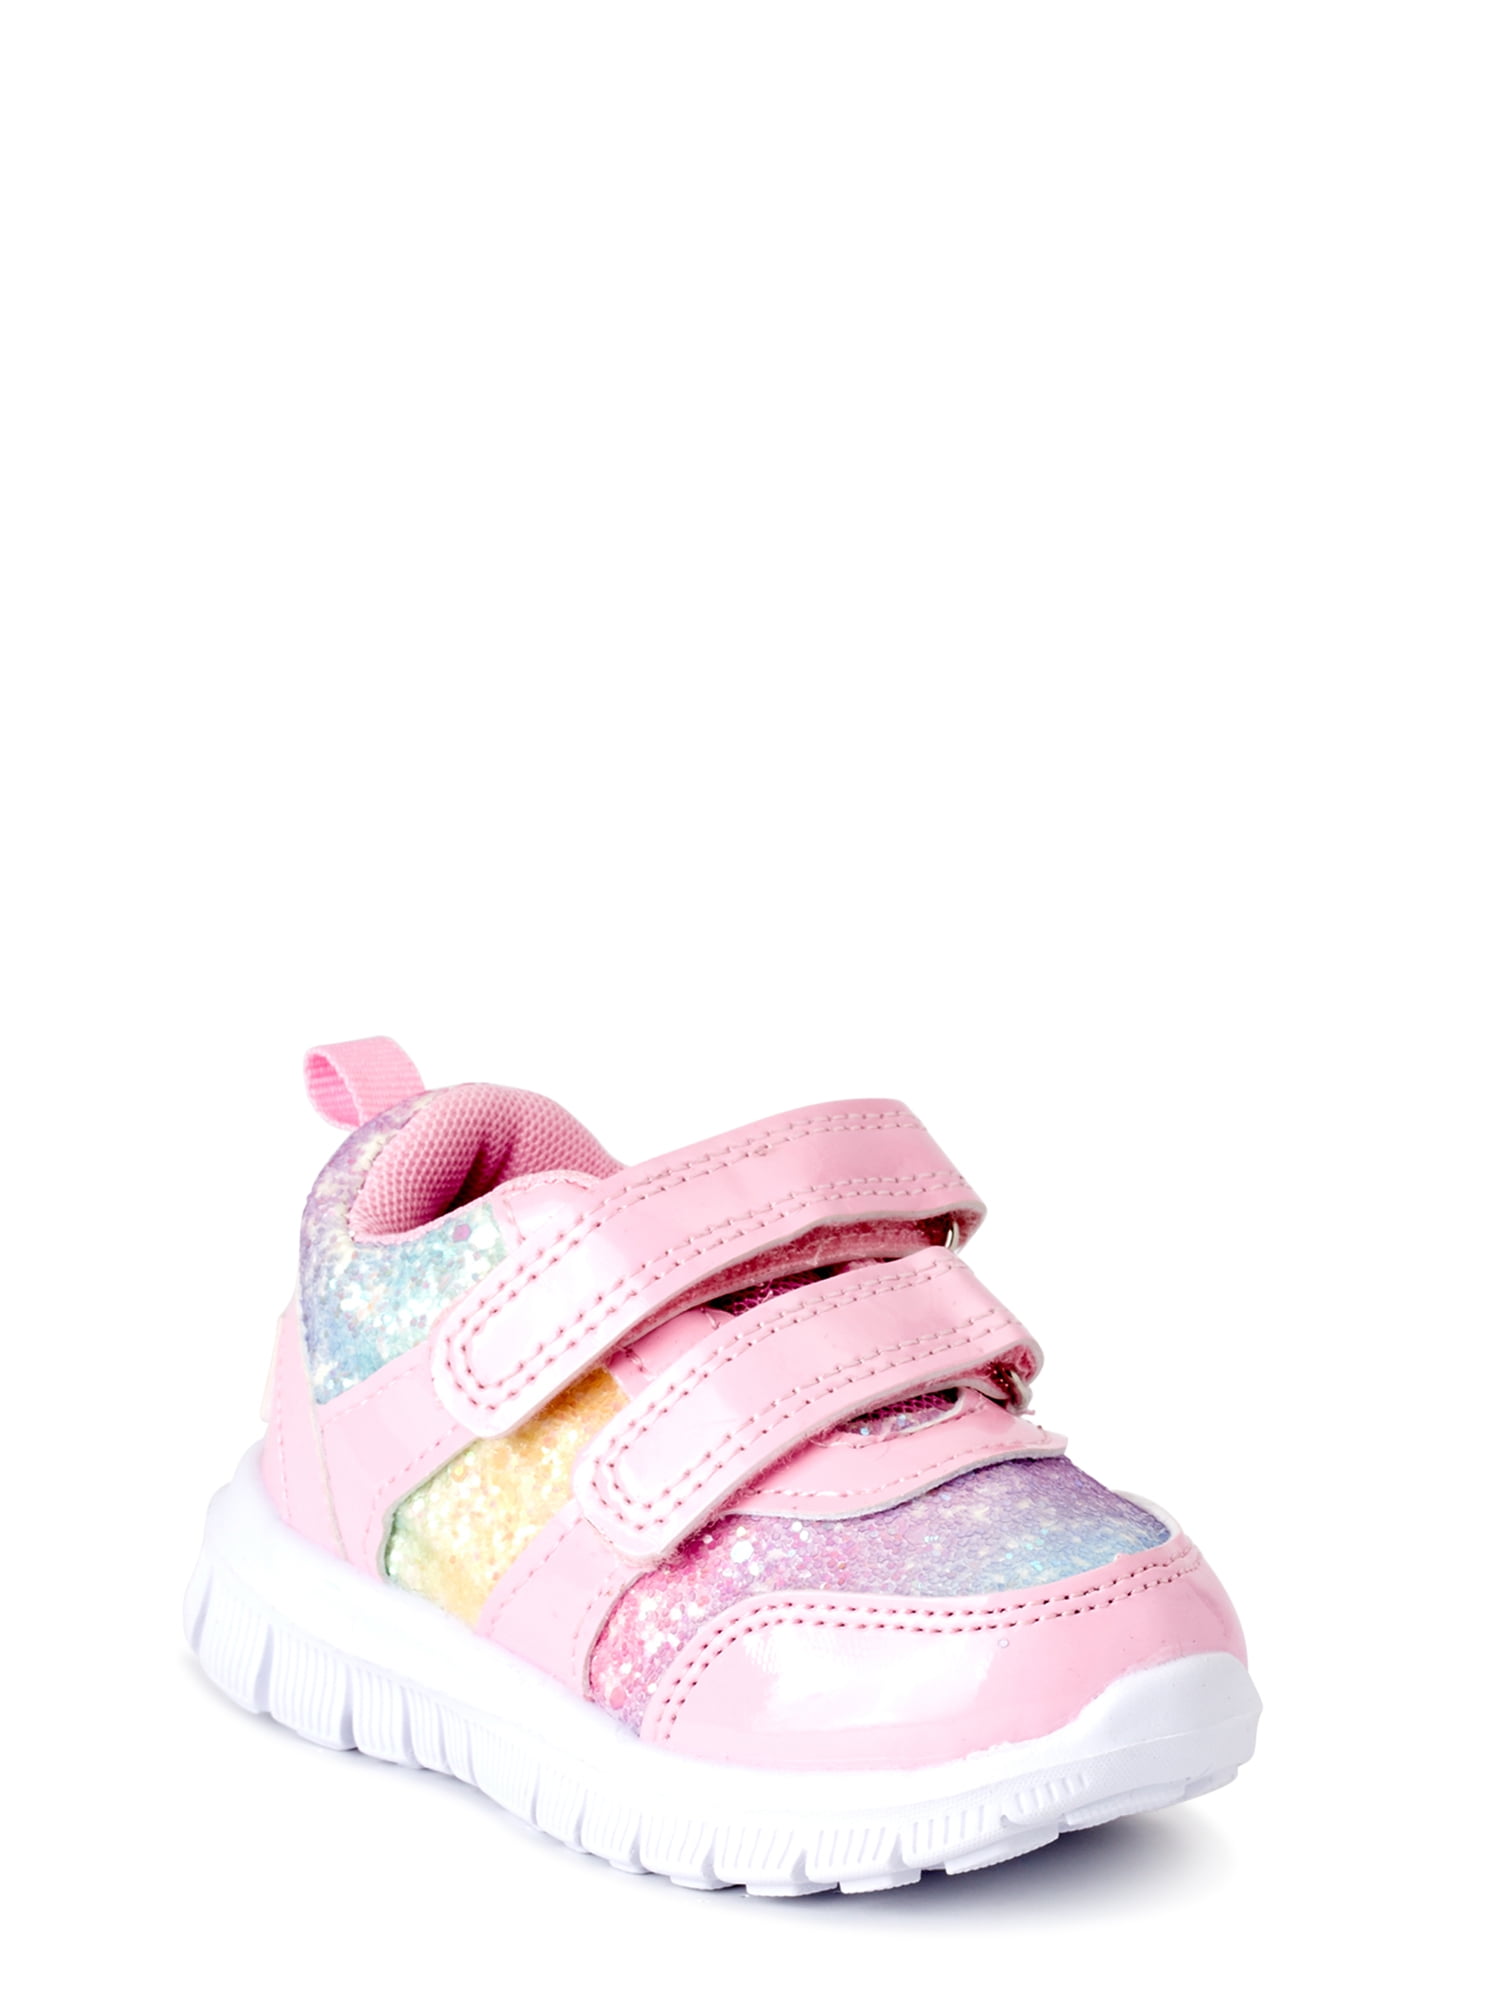 baby girl shoes 3c